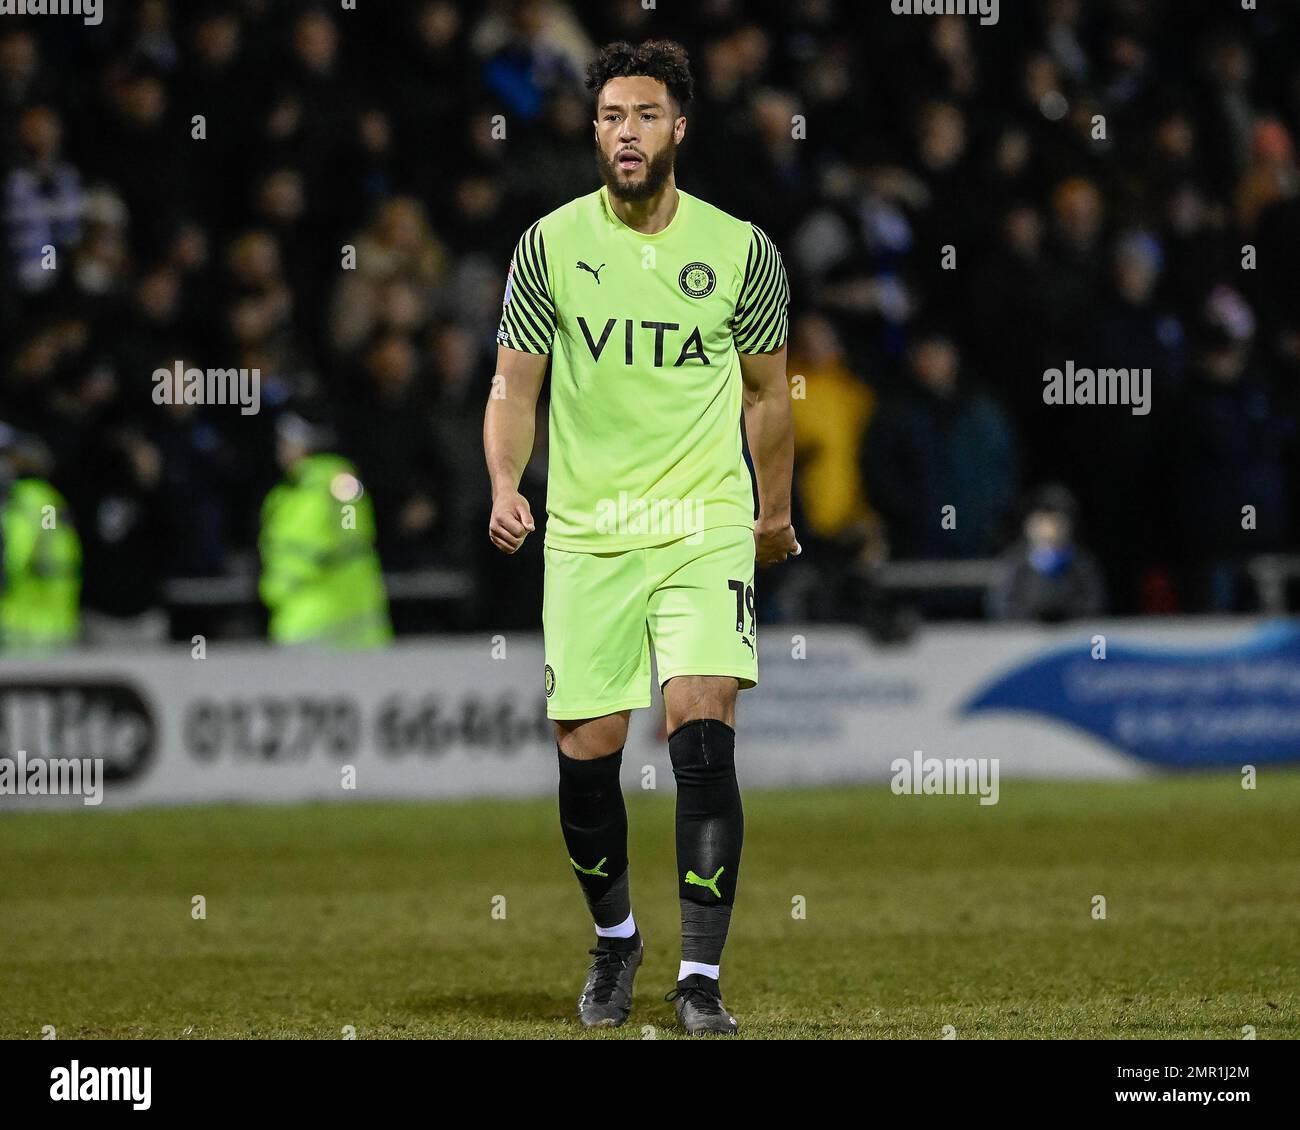 Kyle Wootton #19 of Stockport County during the Sky Bet League 2 match Crewe Alexandra vs Stockport County at Alexandra Stadium, Crewe, United Kingdom, 31st January 2023  (Photo by Ben Roberts/News Images) Stock Photo